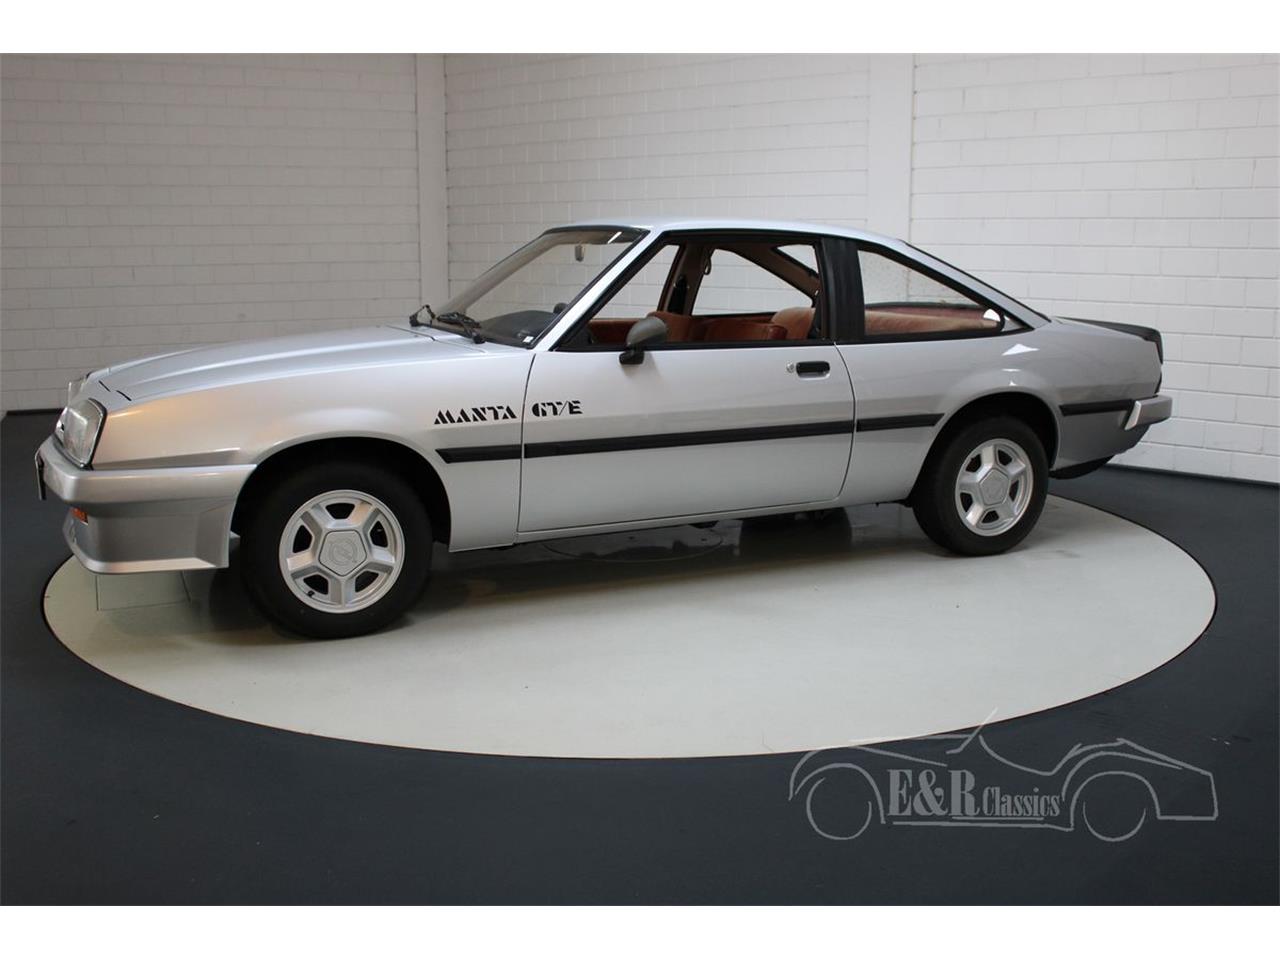 1984 opel manta 400 for sale